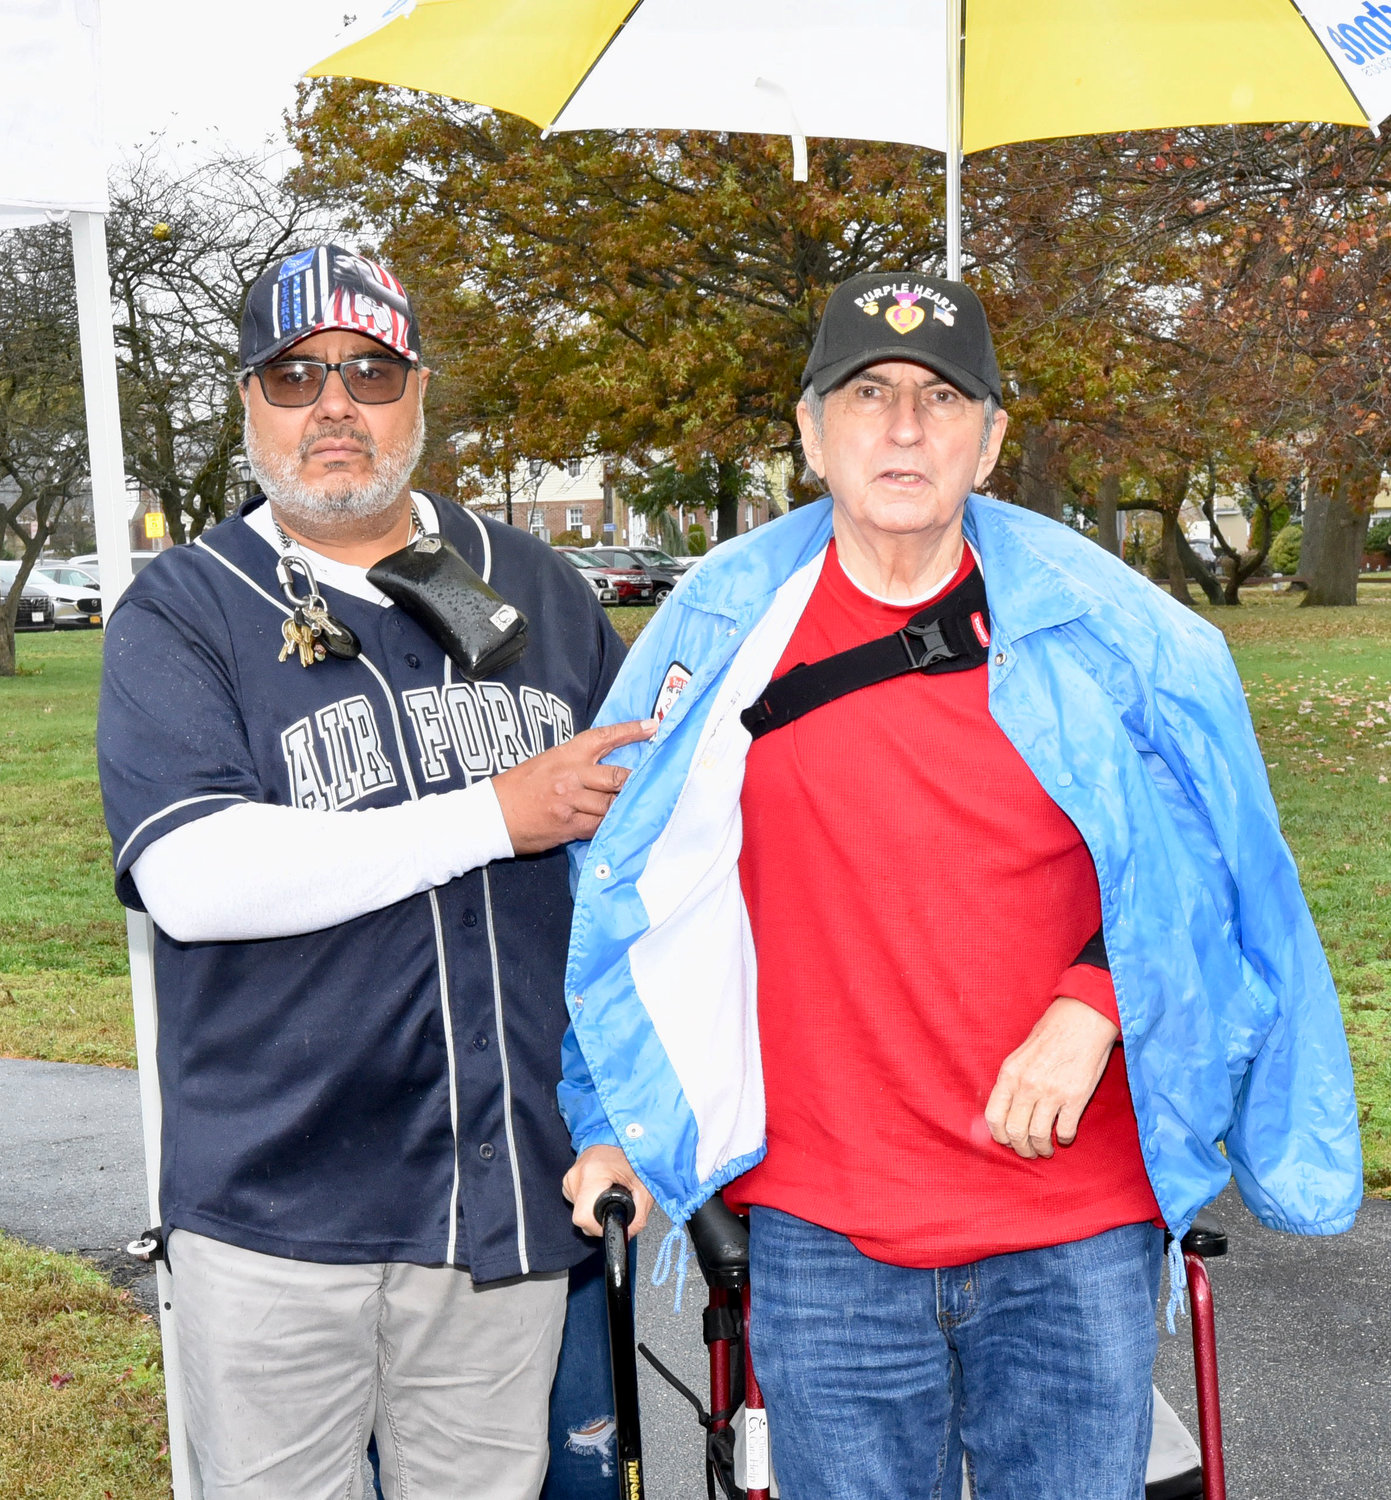 Eric Morales, a U.S. Air Force veteran, and Thomas Holloran, a U.S. Marine veteran, from left, joined the village as they paid tribute to them and countless others at the Veterans Day ceremony.